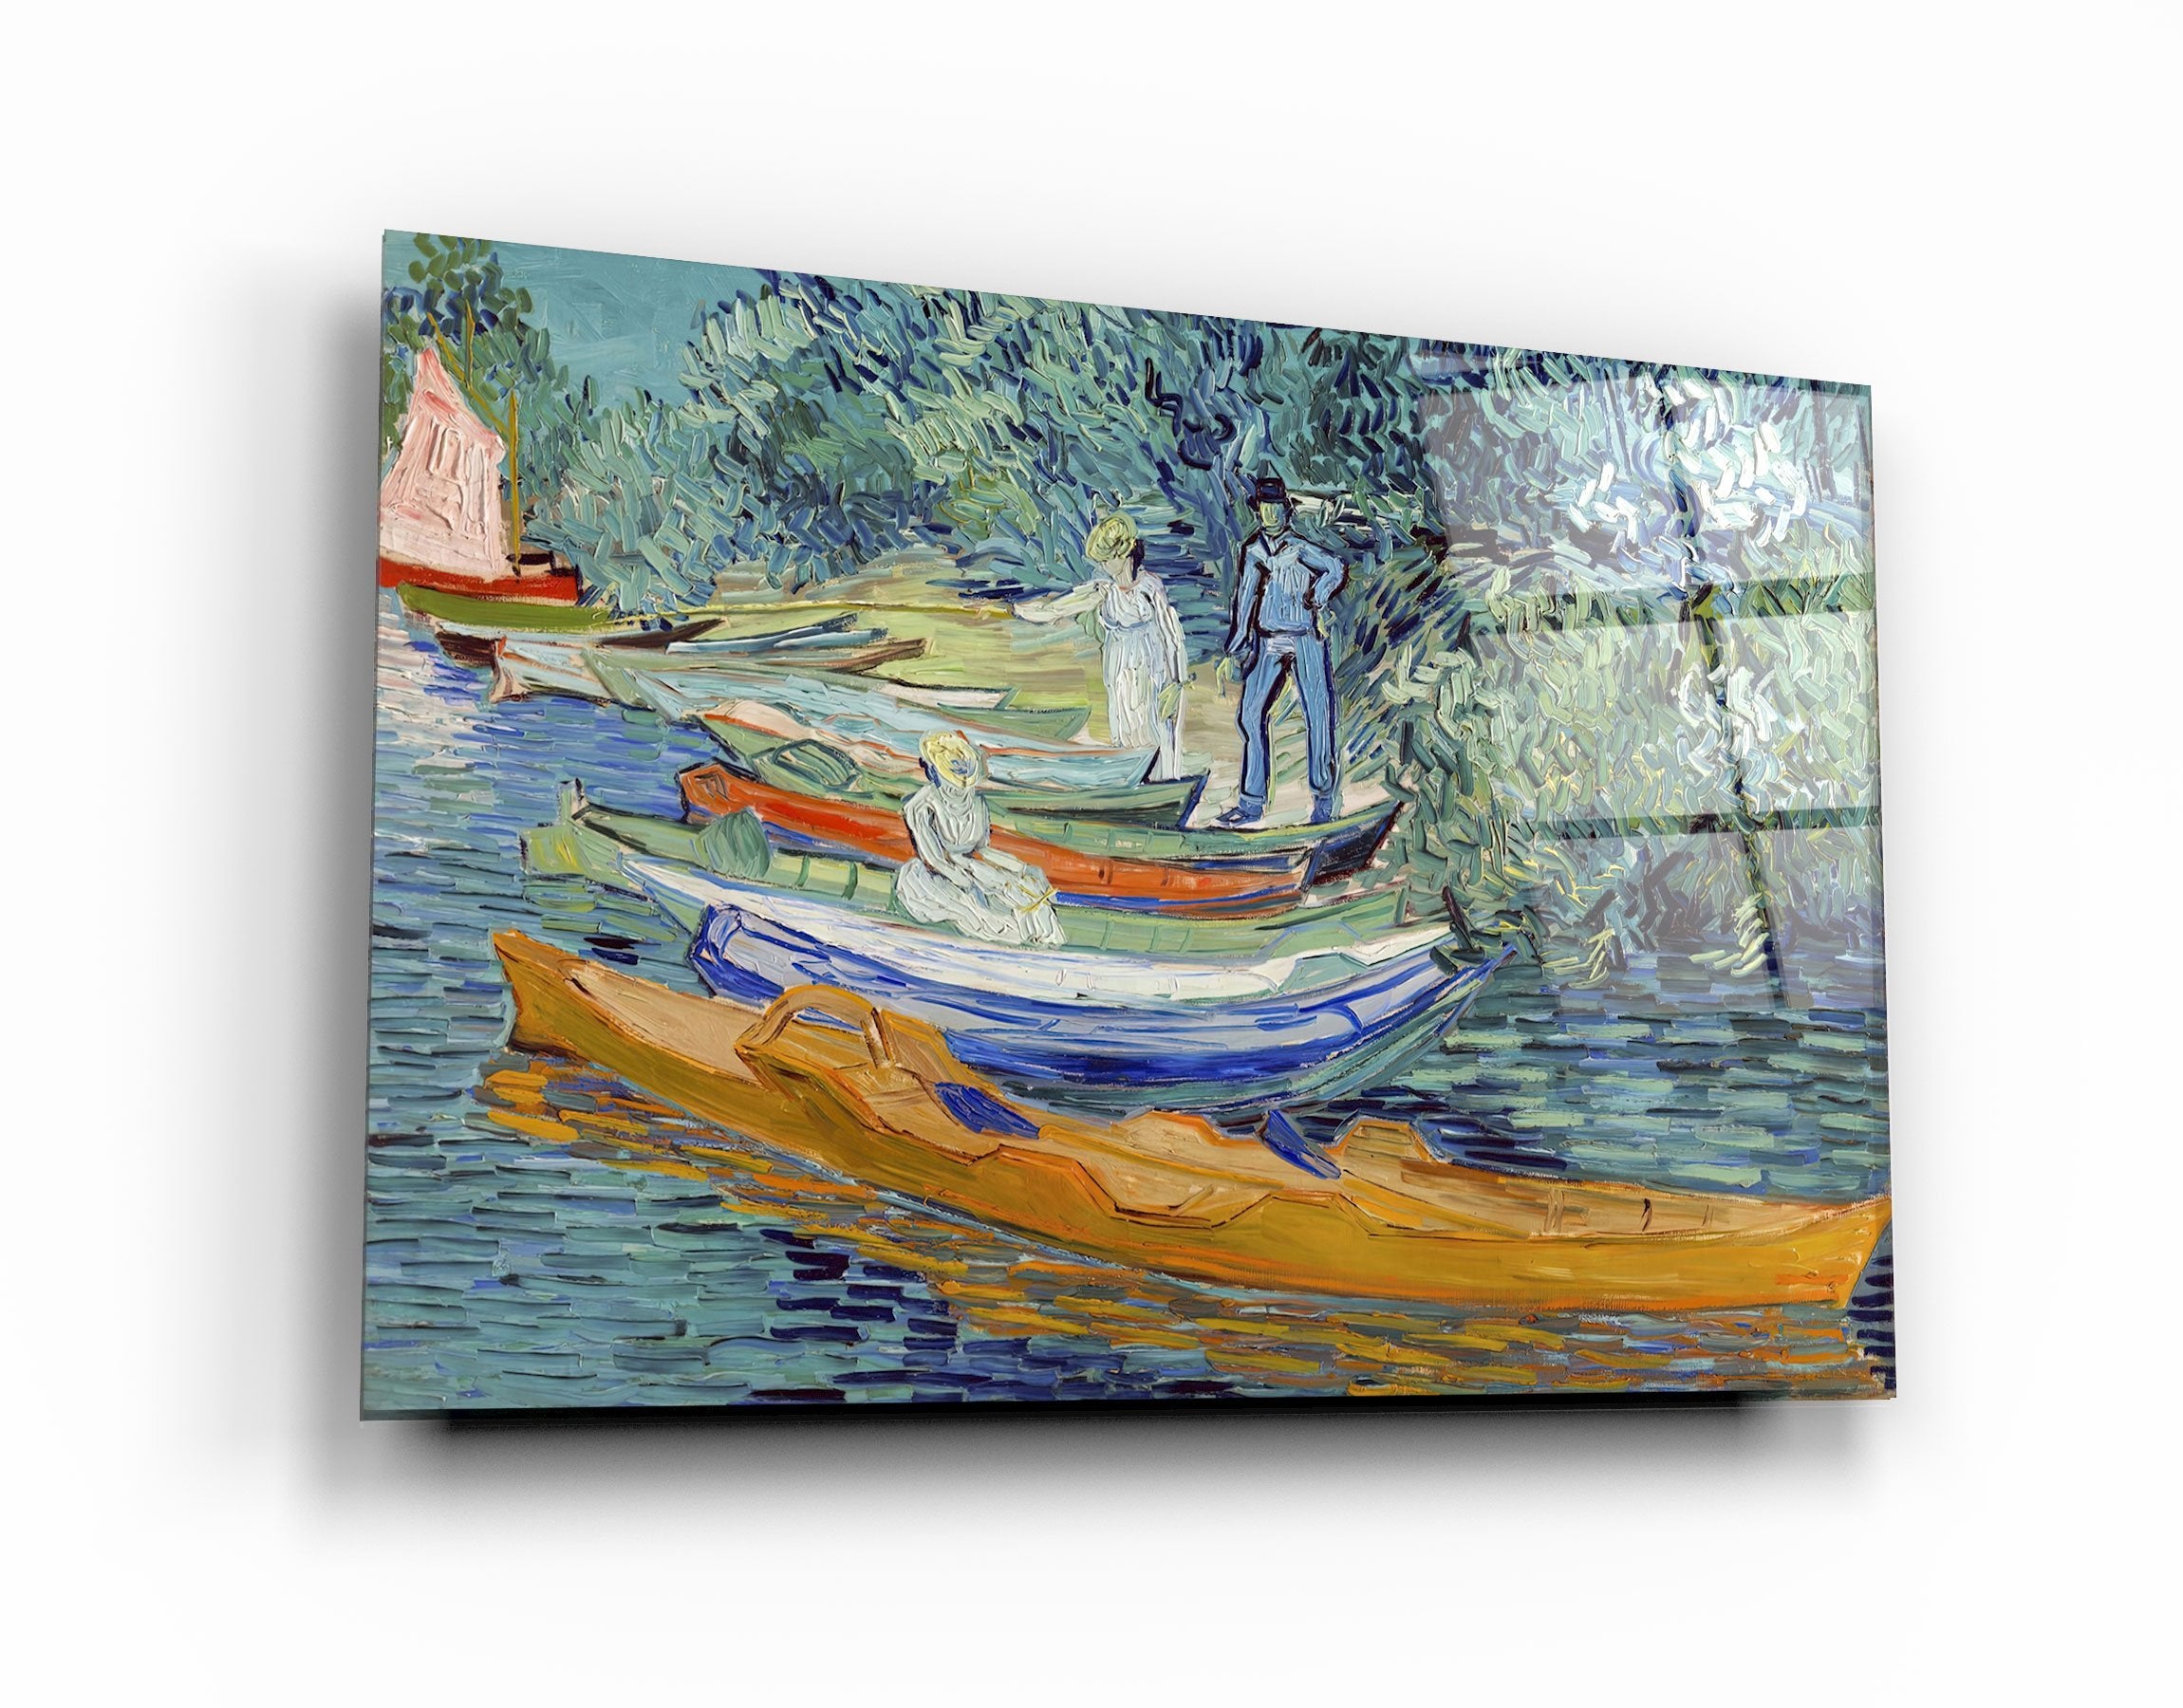 ・"Vincent van Gogh's Bank of the Oise at Auvers (1890)"・Glass Wall Art